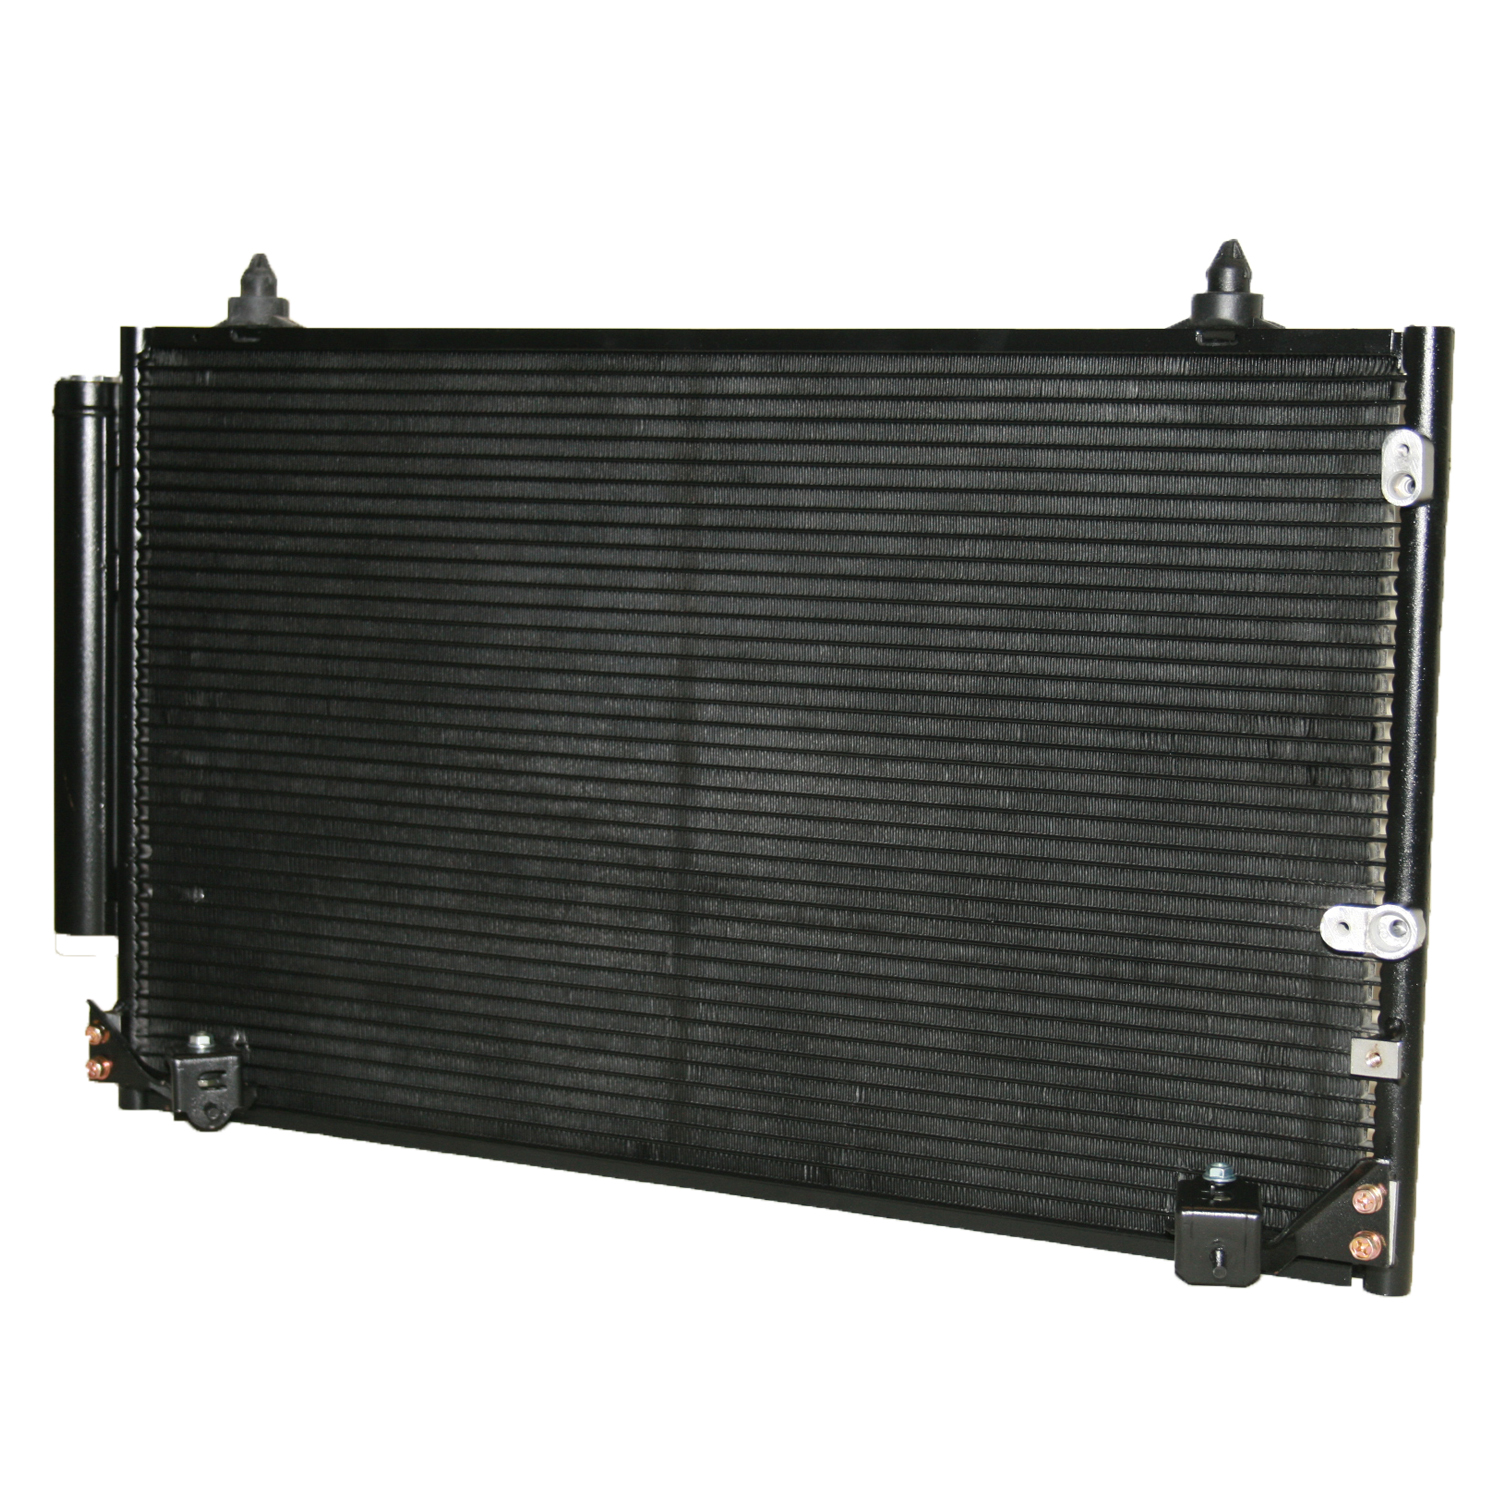 TCW Condenser 44-3304 New Product Image field_60b6a13a6e67c